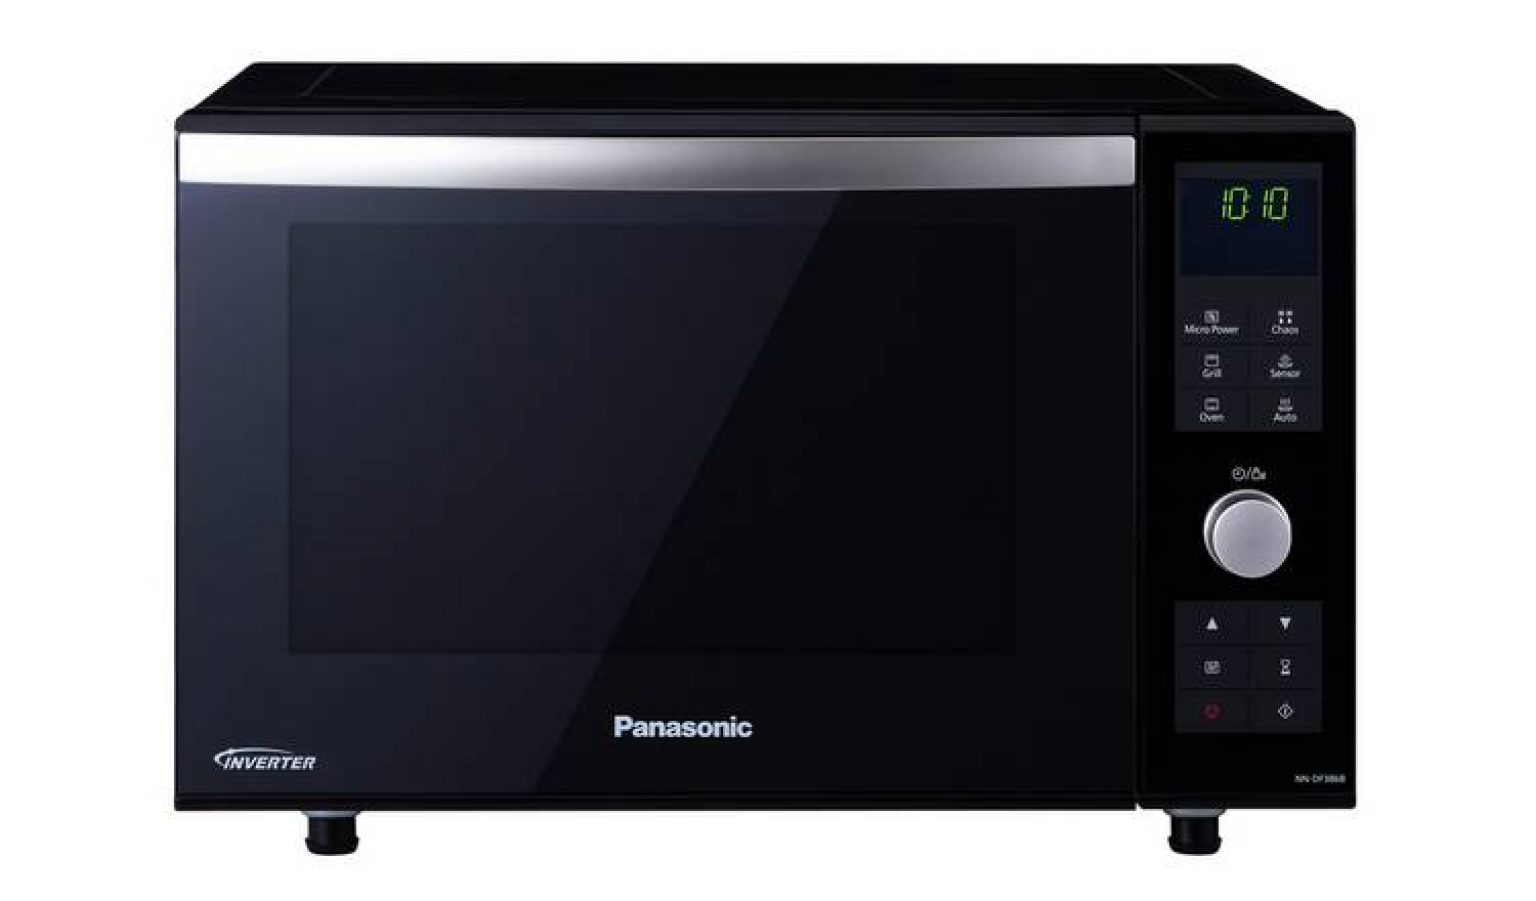 5 Superior Argos microwave ovens combination - All The Top Picks